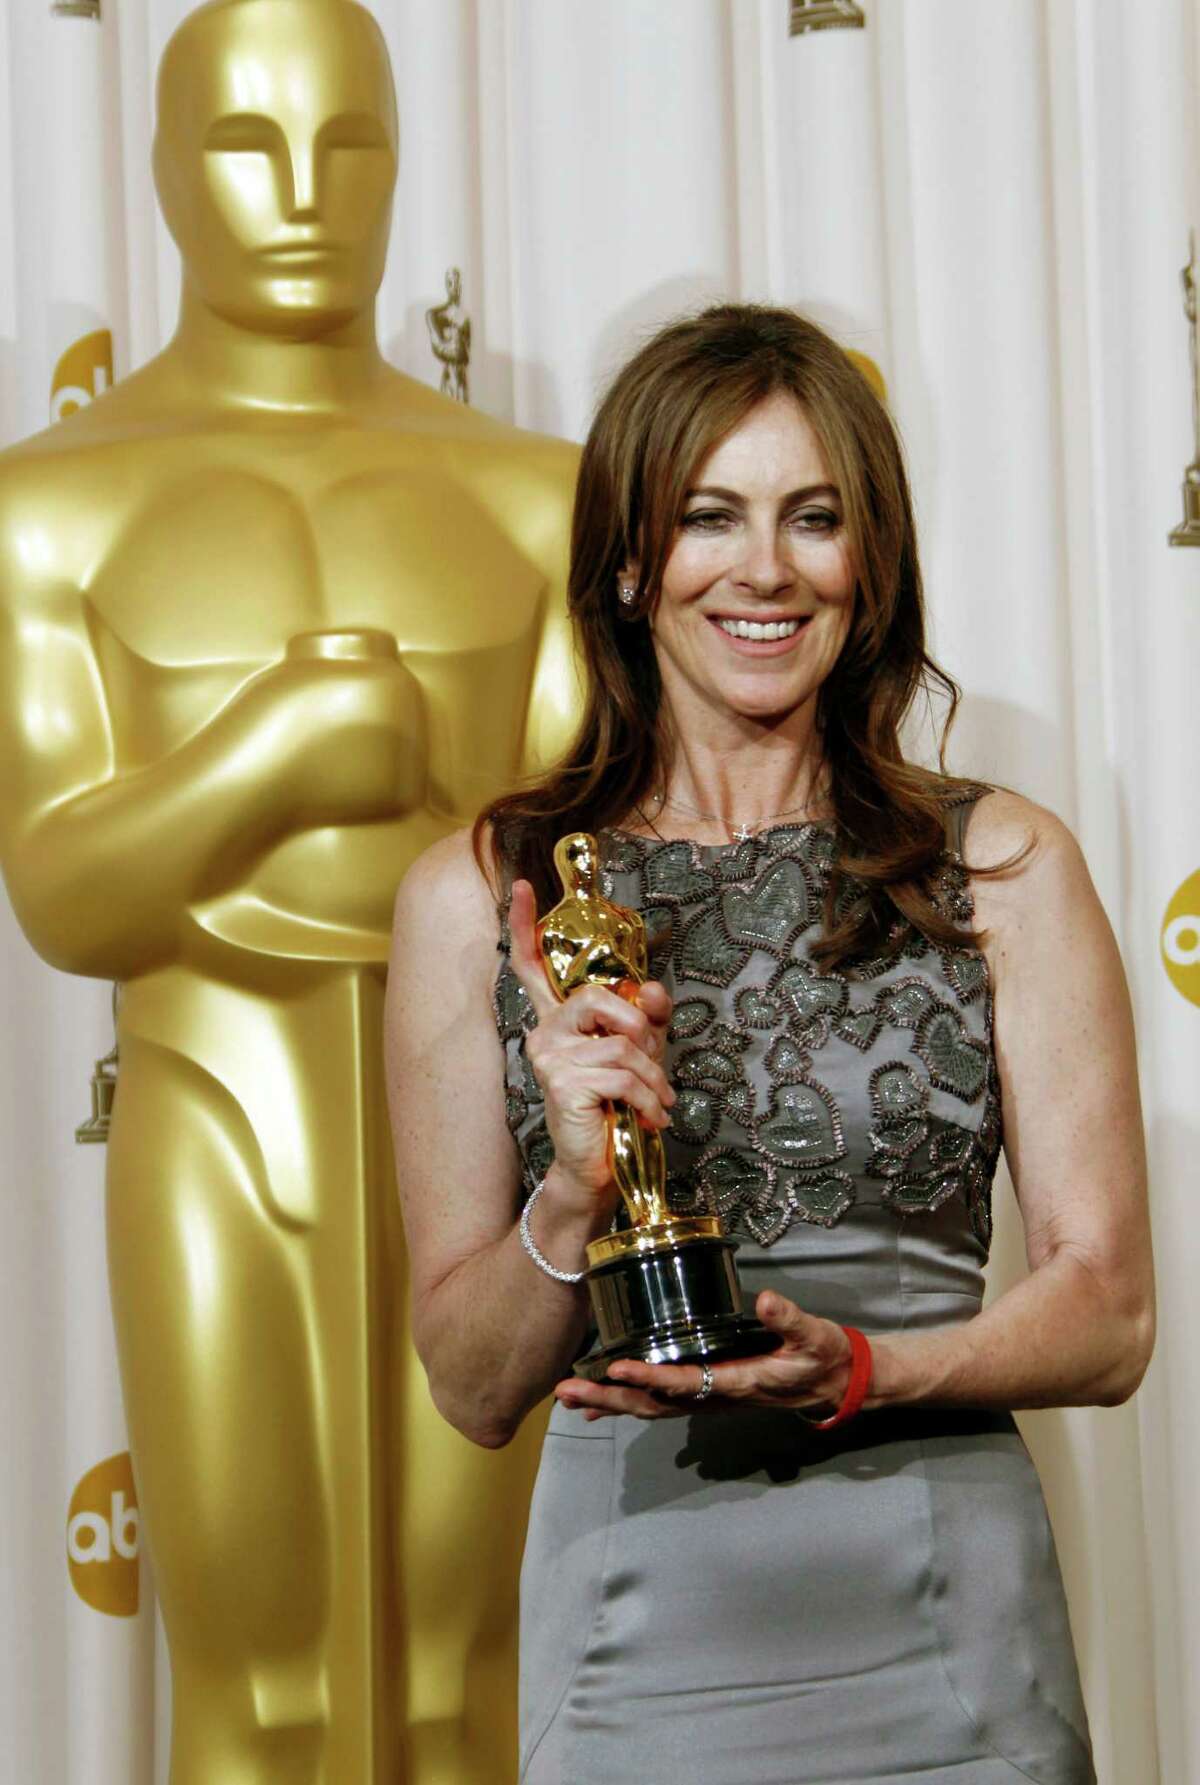 Six years after Kathryn Bigelow won the best-director Oscar for "The Hurt Locker" in 2010, the slate of best-director nominees is all male, as it has been every year since Bigelow won. Women have been nominated only four times in the Academy Awards' 88-year history.